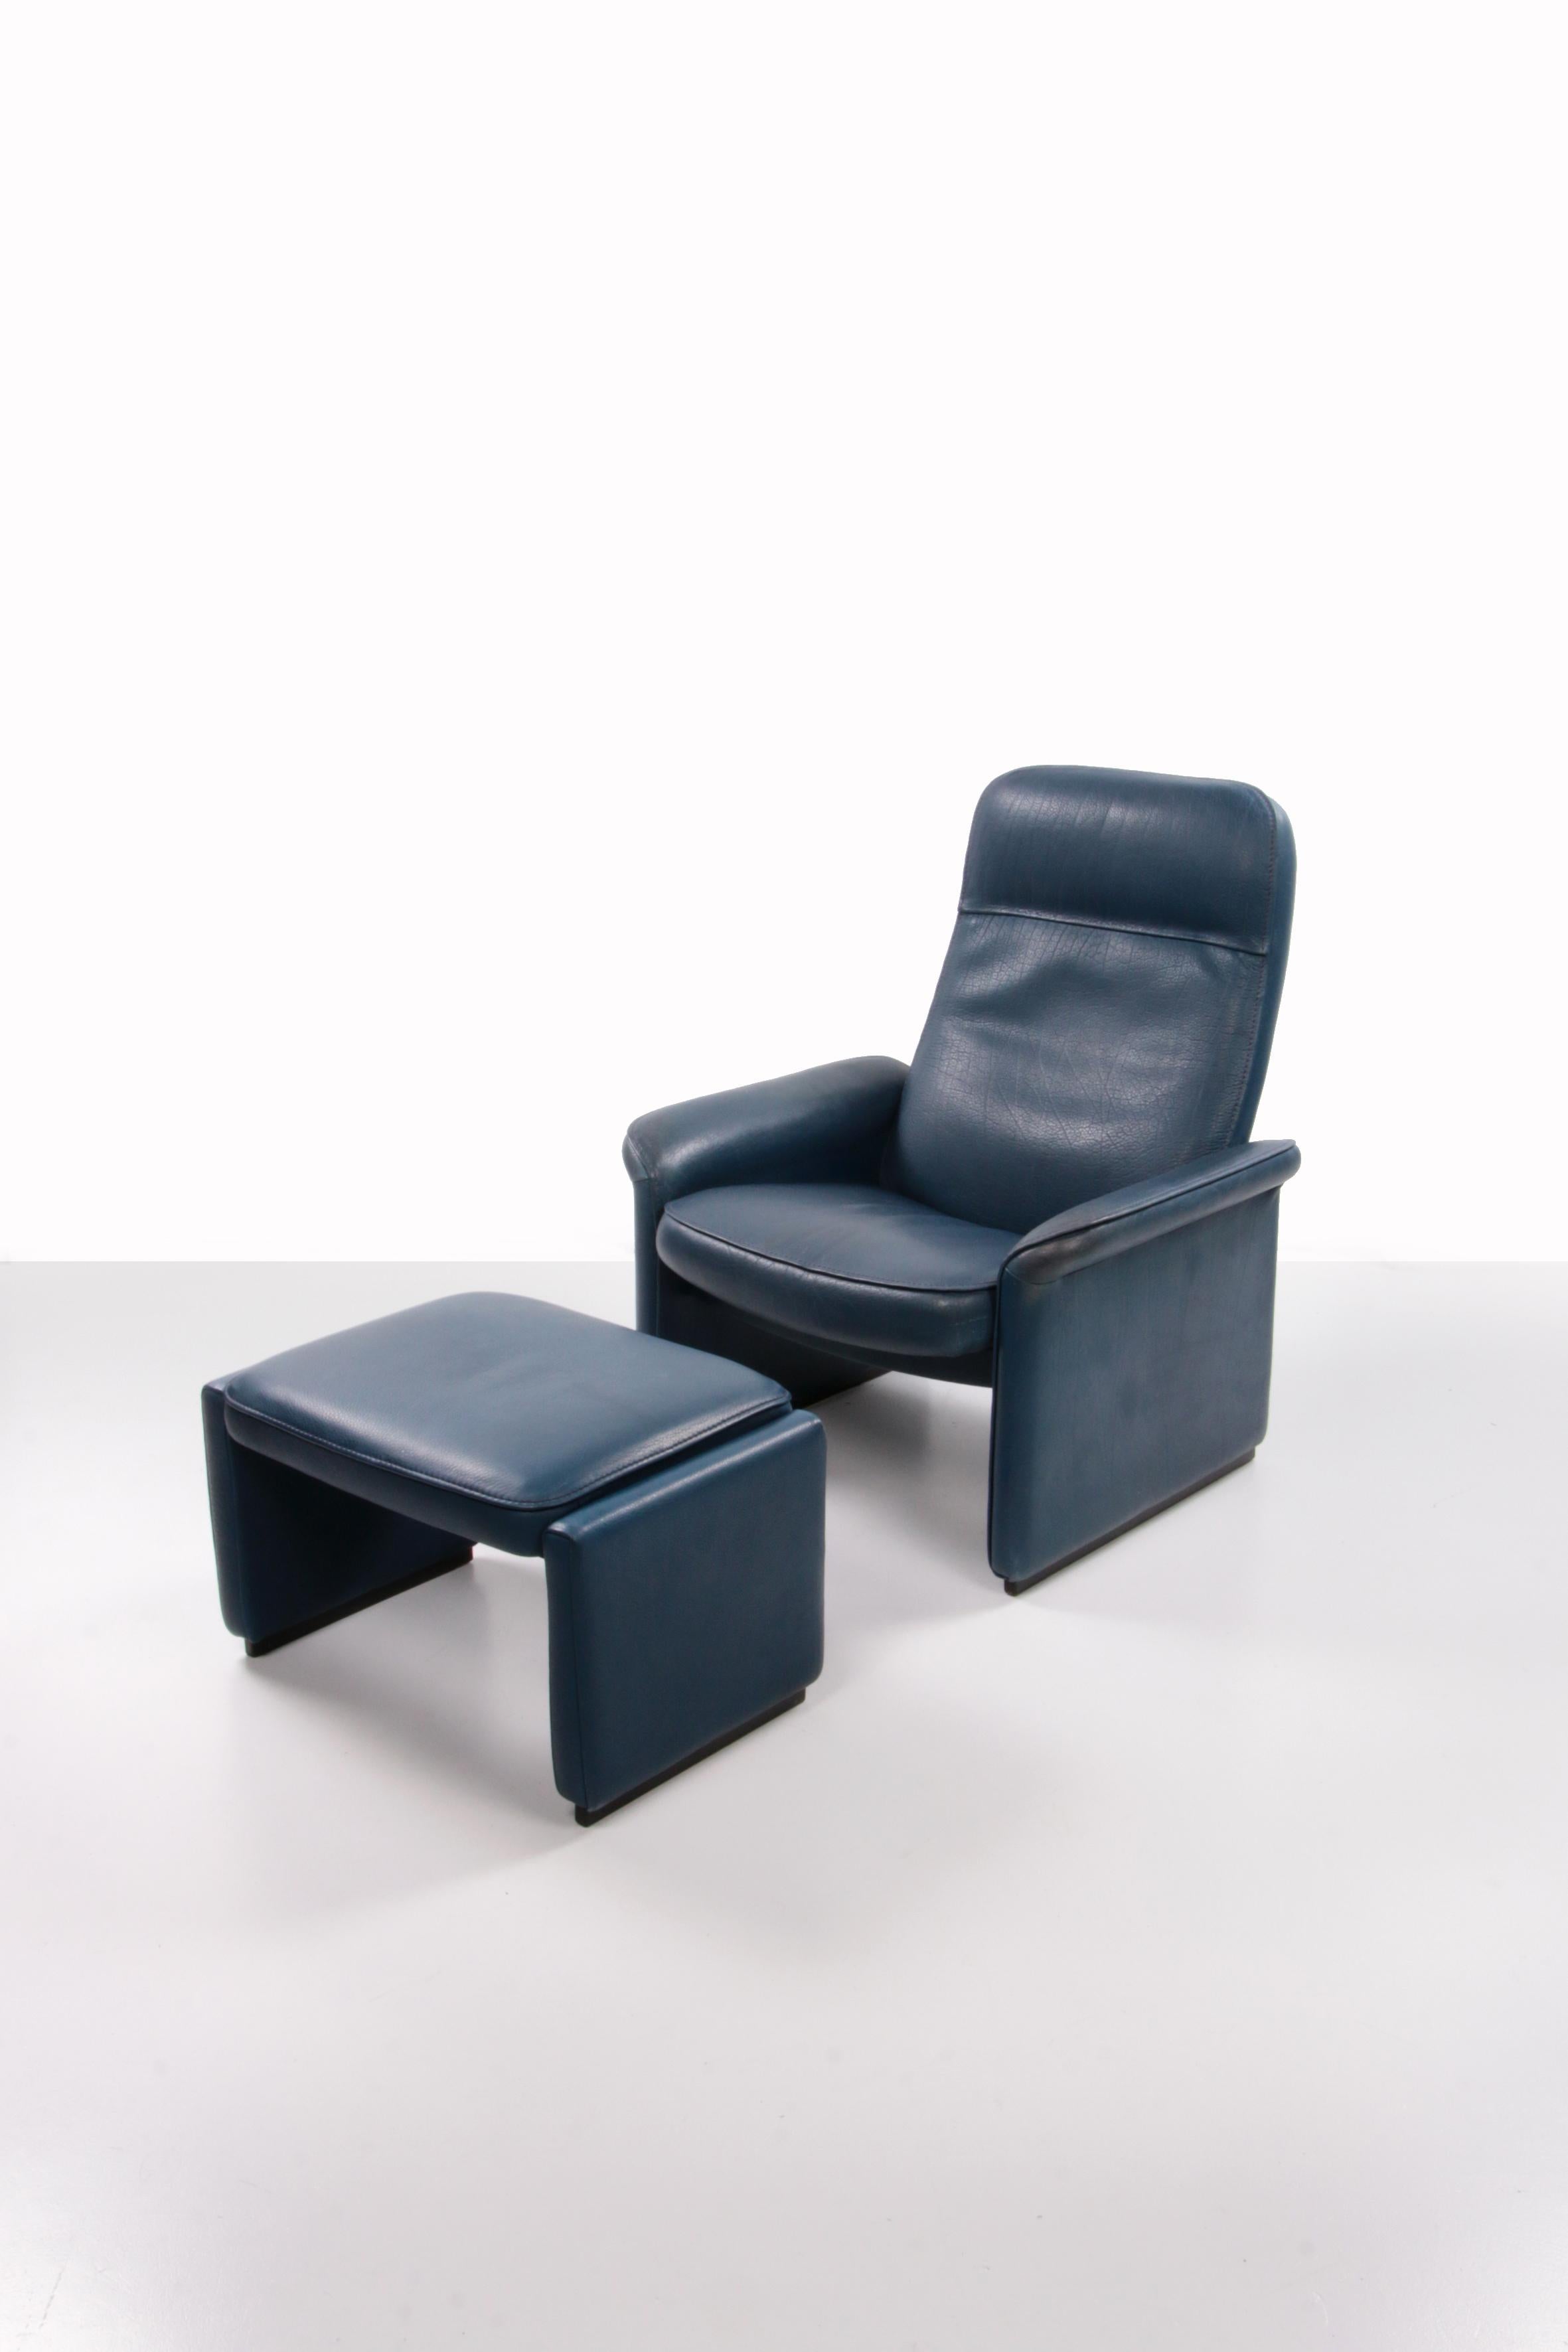 De Sede DS 50 Relax armchair with Hocker leather Petrol colour, 1980 Switzerland

The De Sede DS-50 armchair has a nice seating comfort. DS-50 armchair has a manually adjustable backrest which provides ultimate seating comfort. The Neck leather